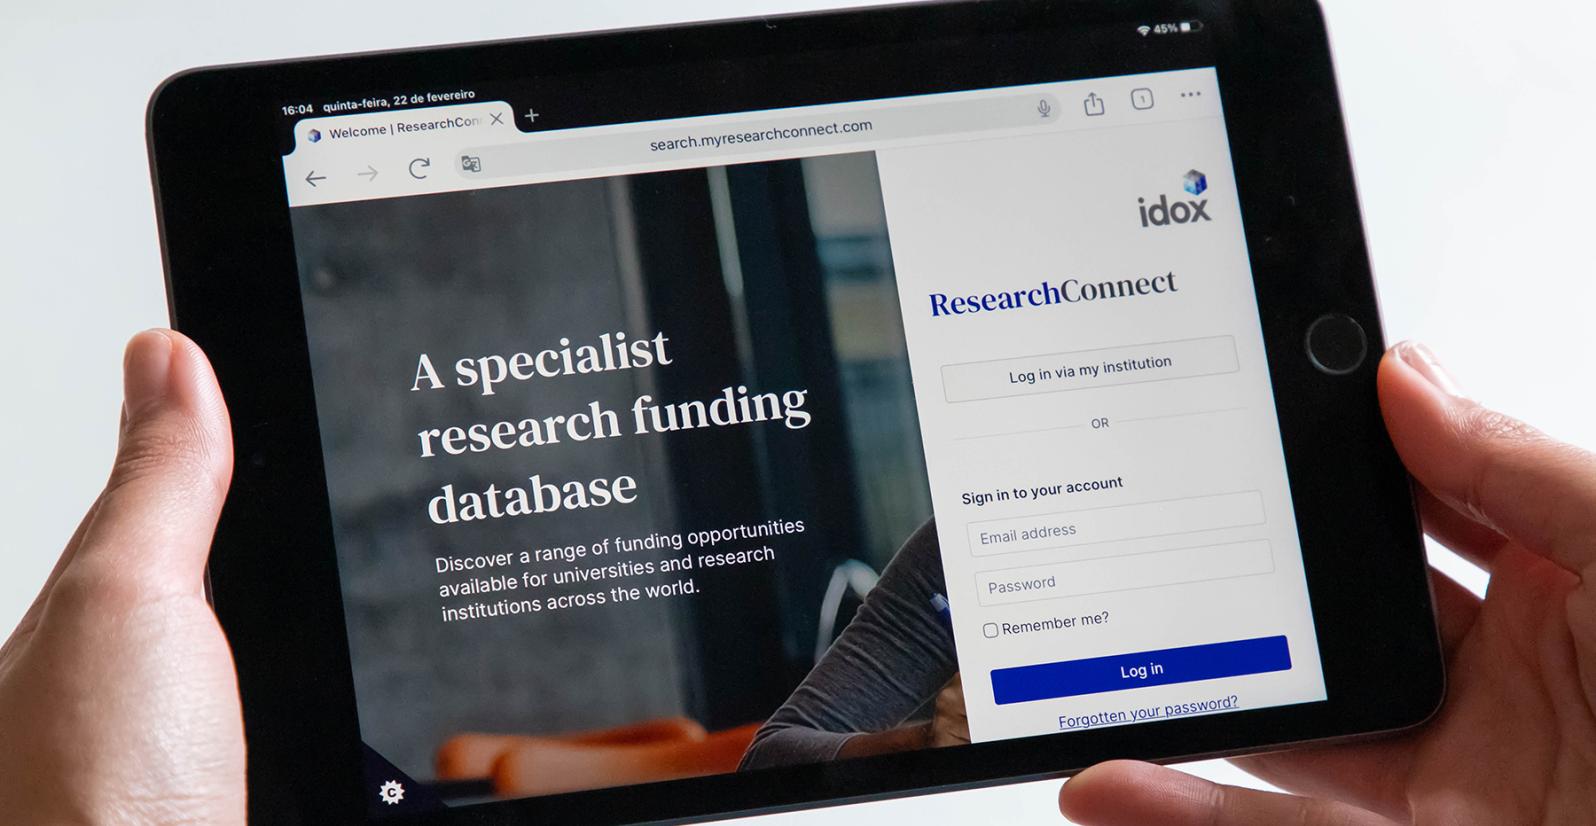 Research Connect